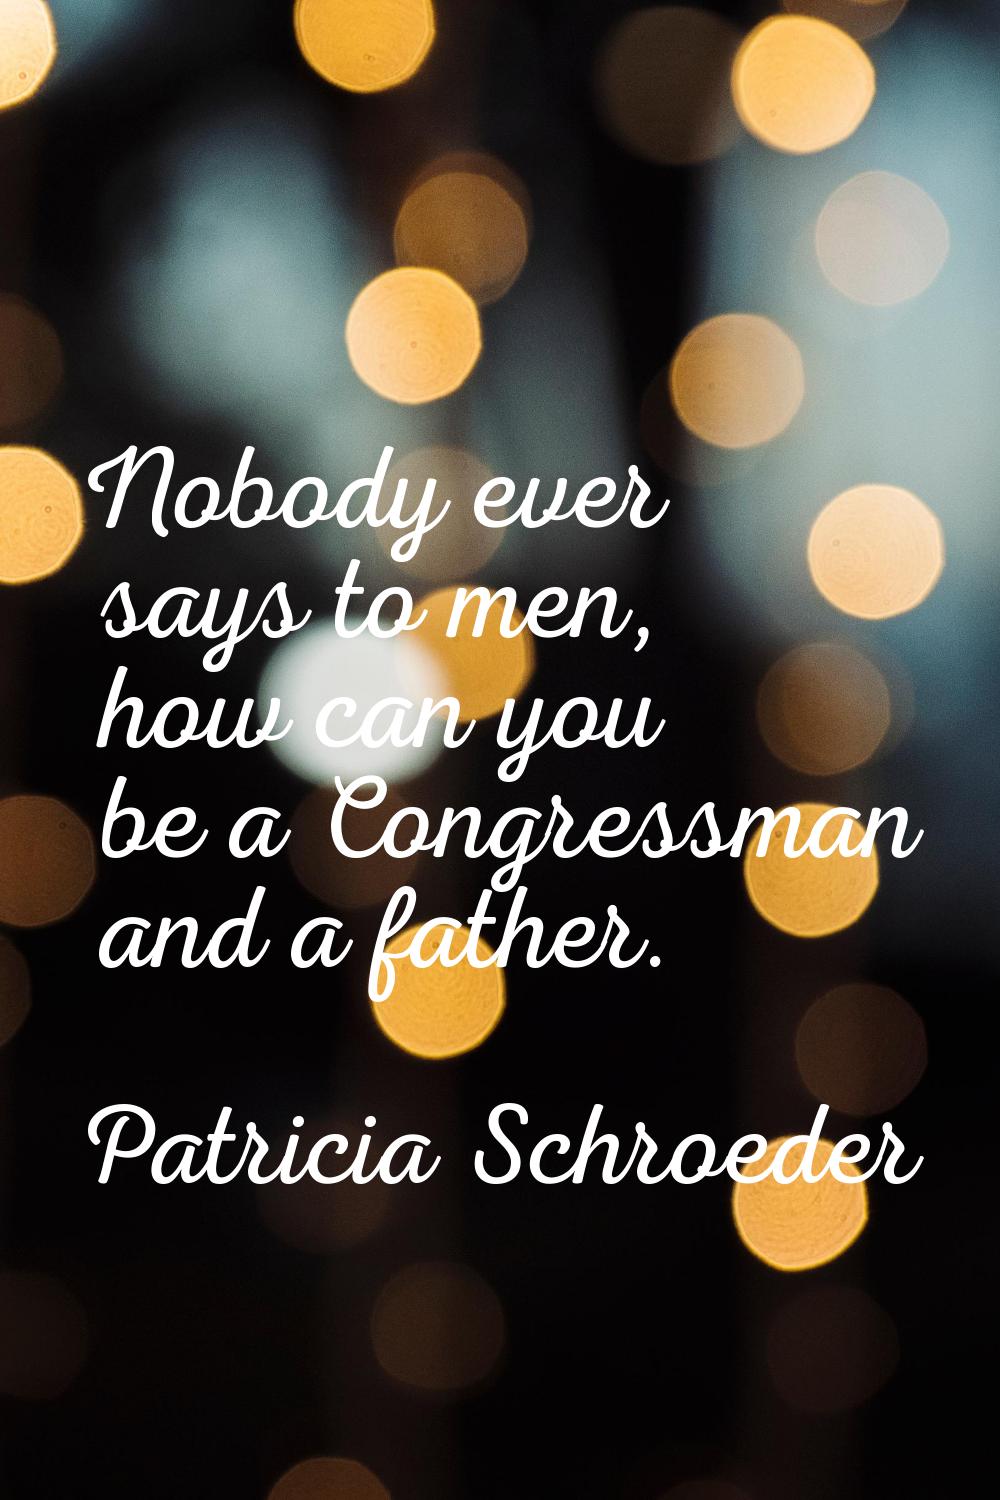 Nobody ever says to men, how can you be a Congressman and a father.